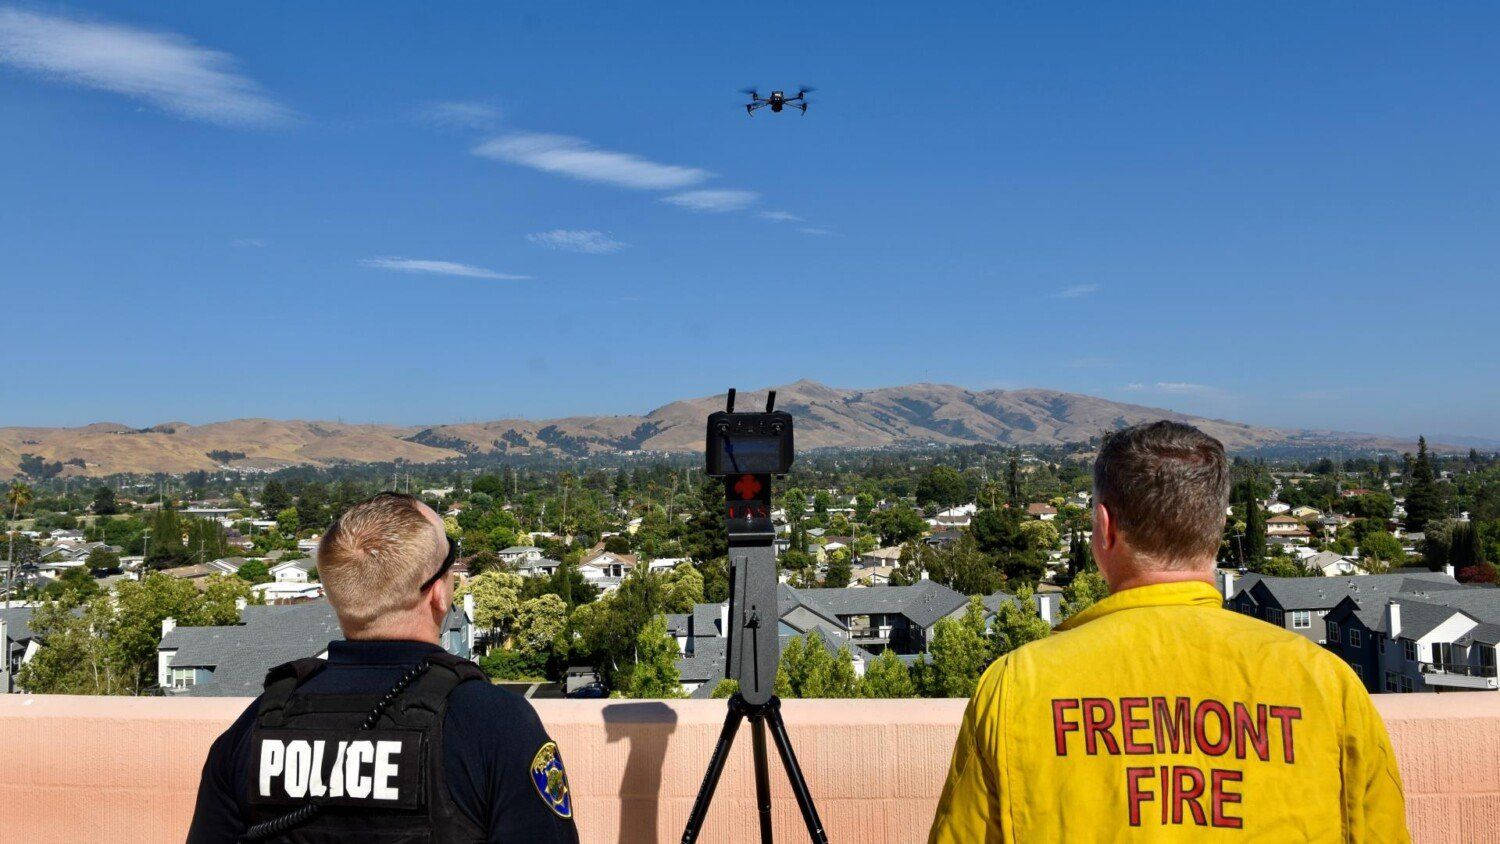 a police officer and a fire fighter standing on top of a building with their backs facing the camera watching a drone fly in the sky over a city setting